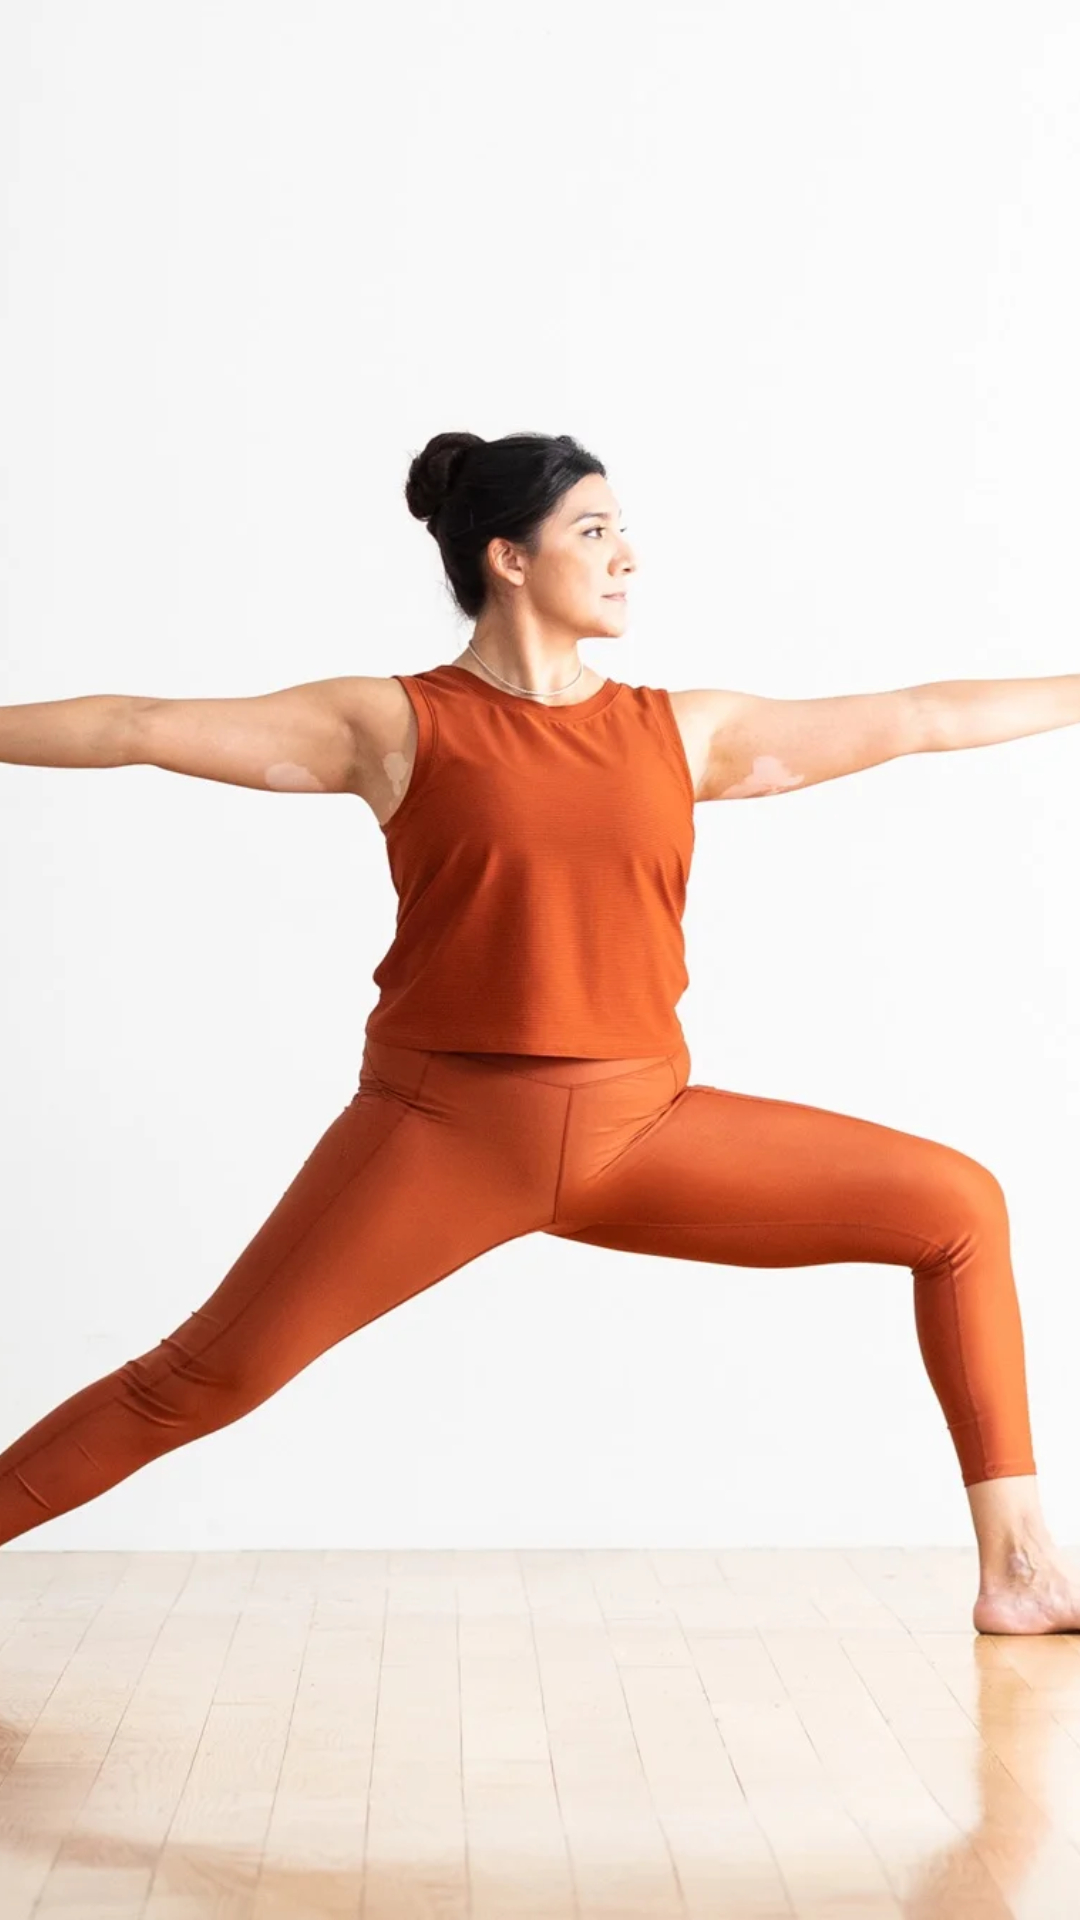 11 Crazy Yoga Poses for A Hardcore Practice - Welltech